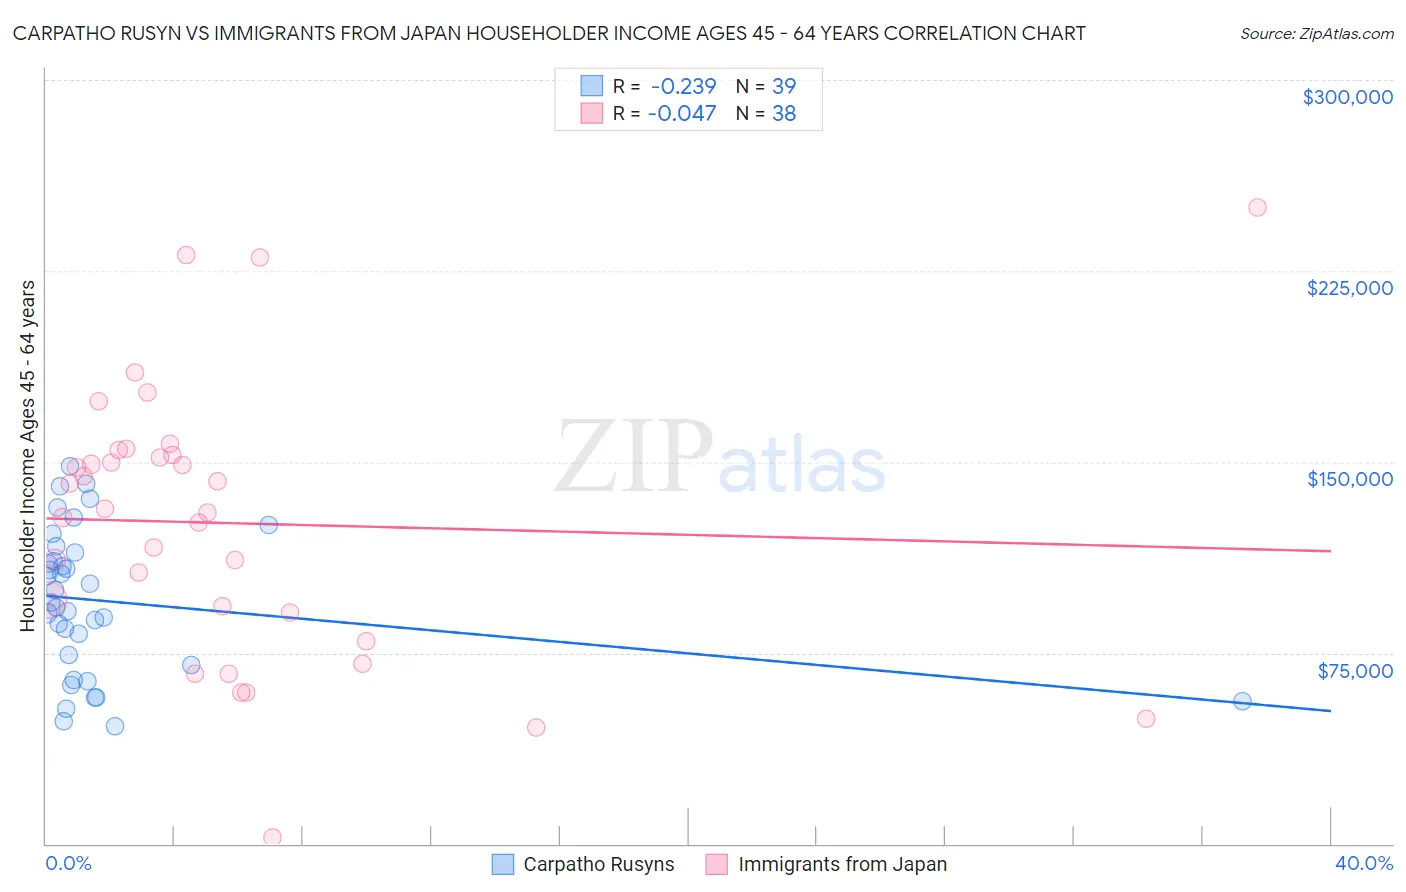 Carpatho Rusyn vs Immigrants from Japan Householder Income Ages 45 - 64 years